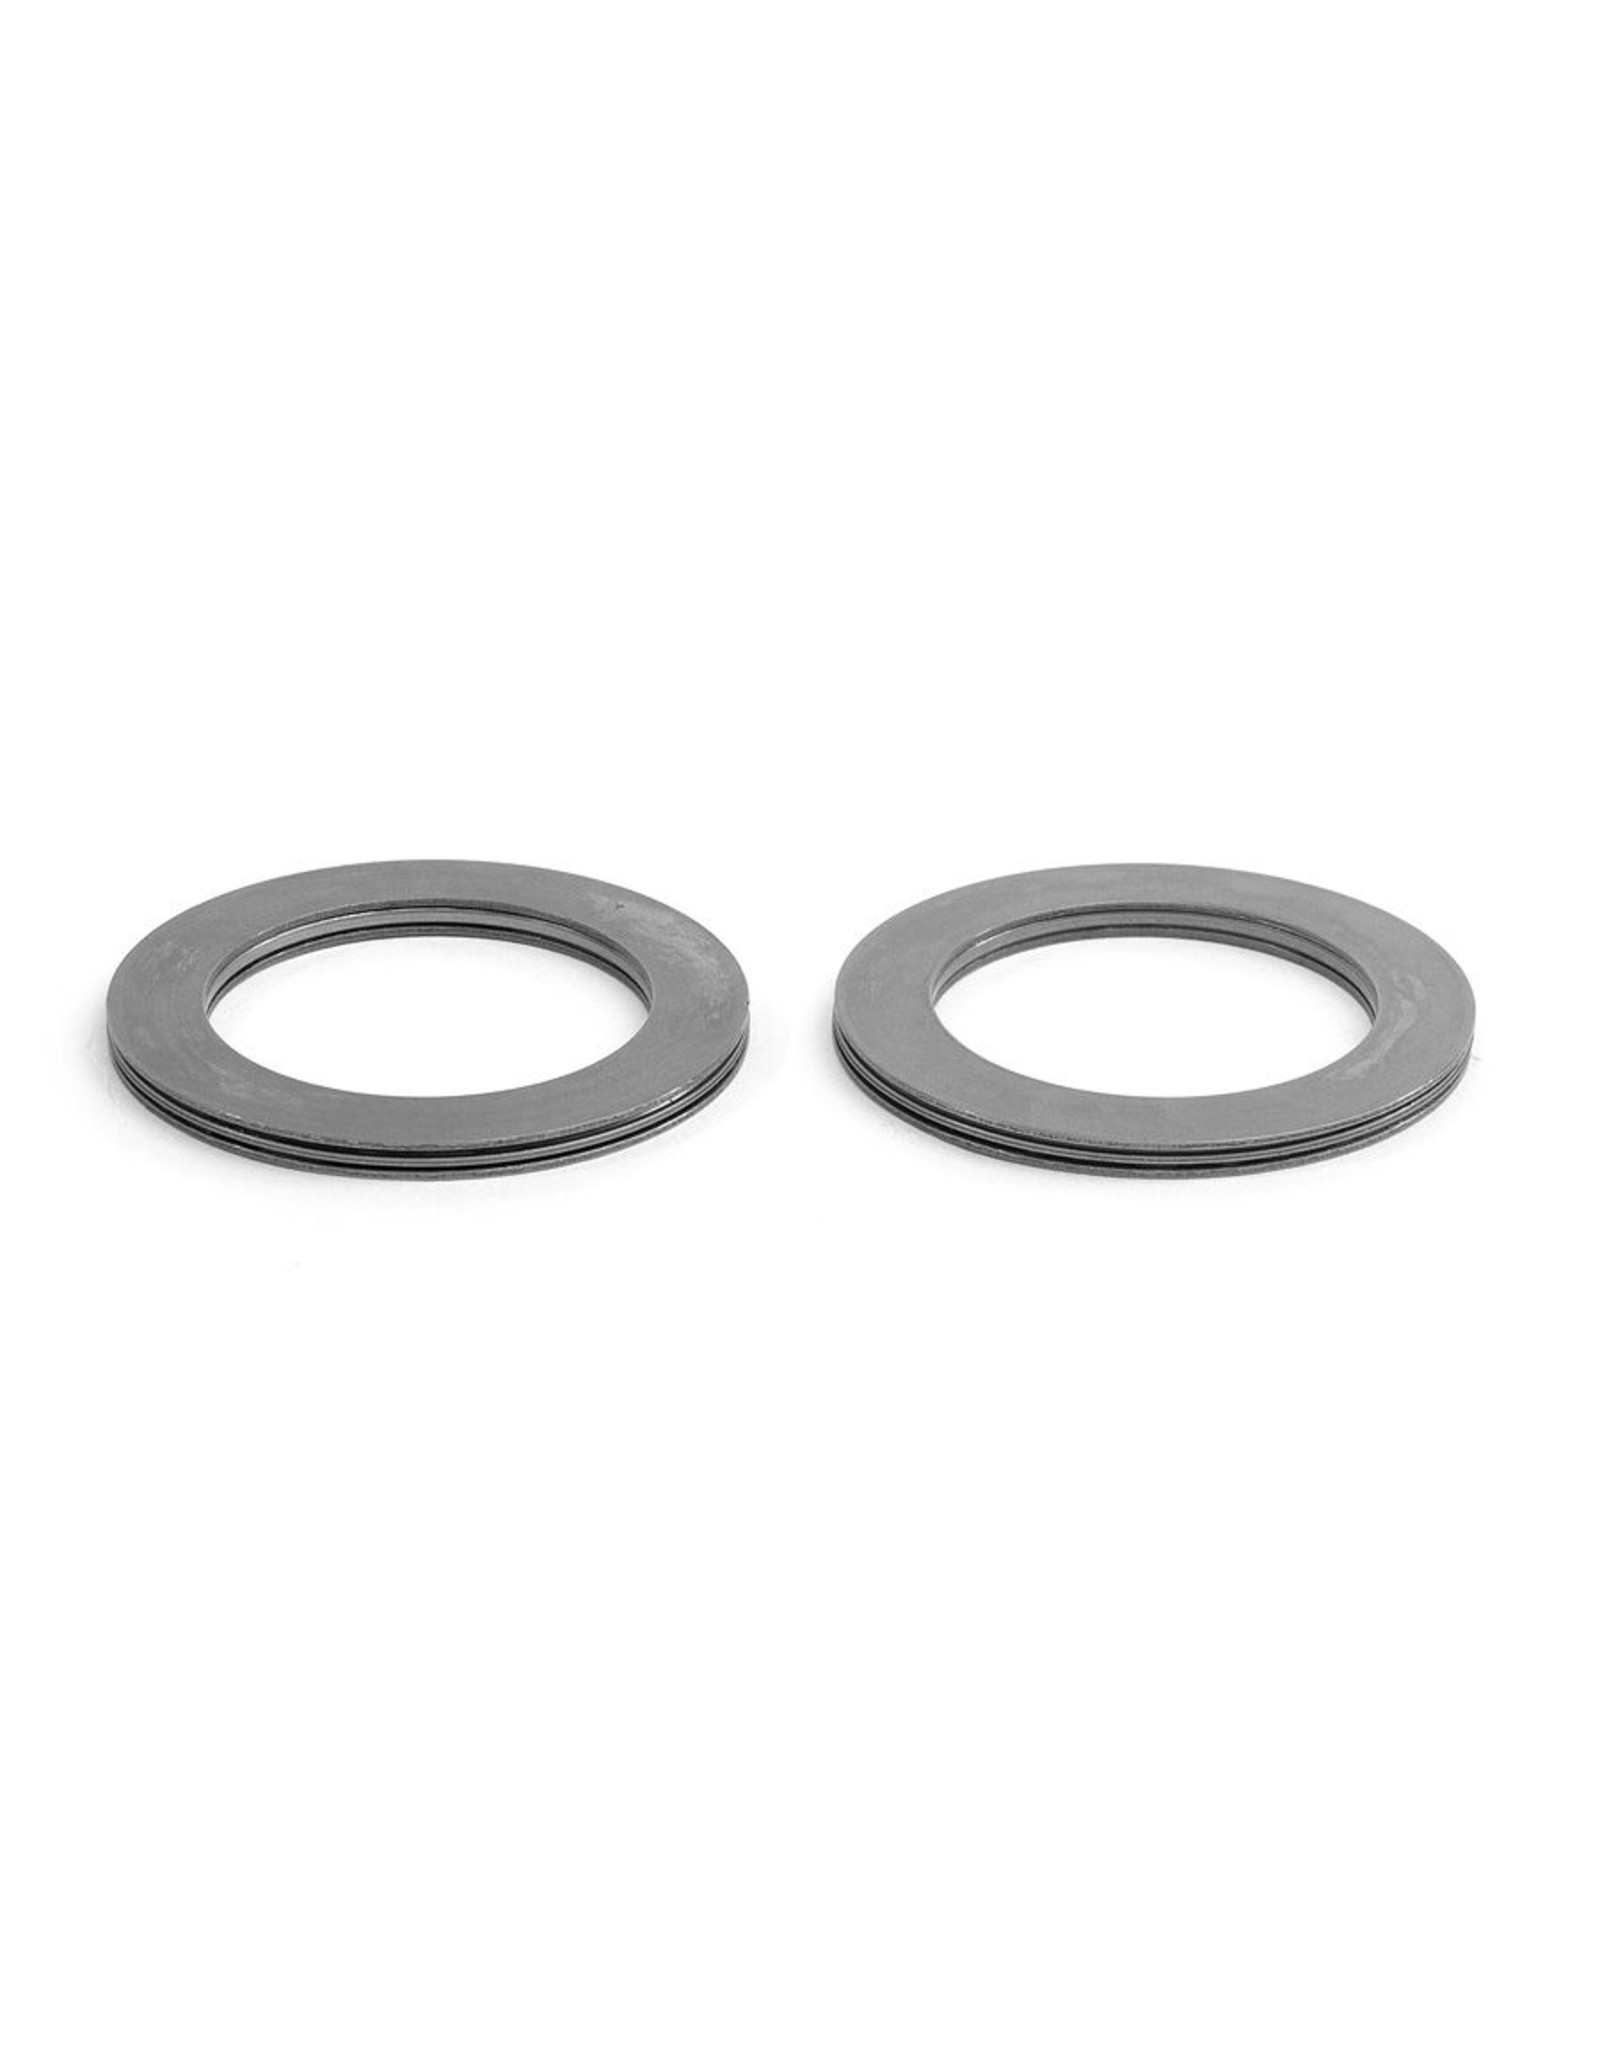 Losmandy Losmandy Clutch Knob Spring Washer, G-11 GM 8 and G9, Set of 2 (Includes Small Order Handling Fee of $20)